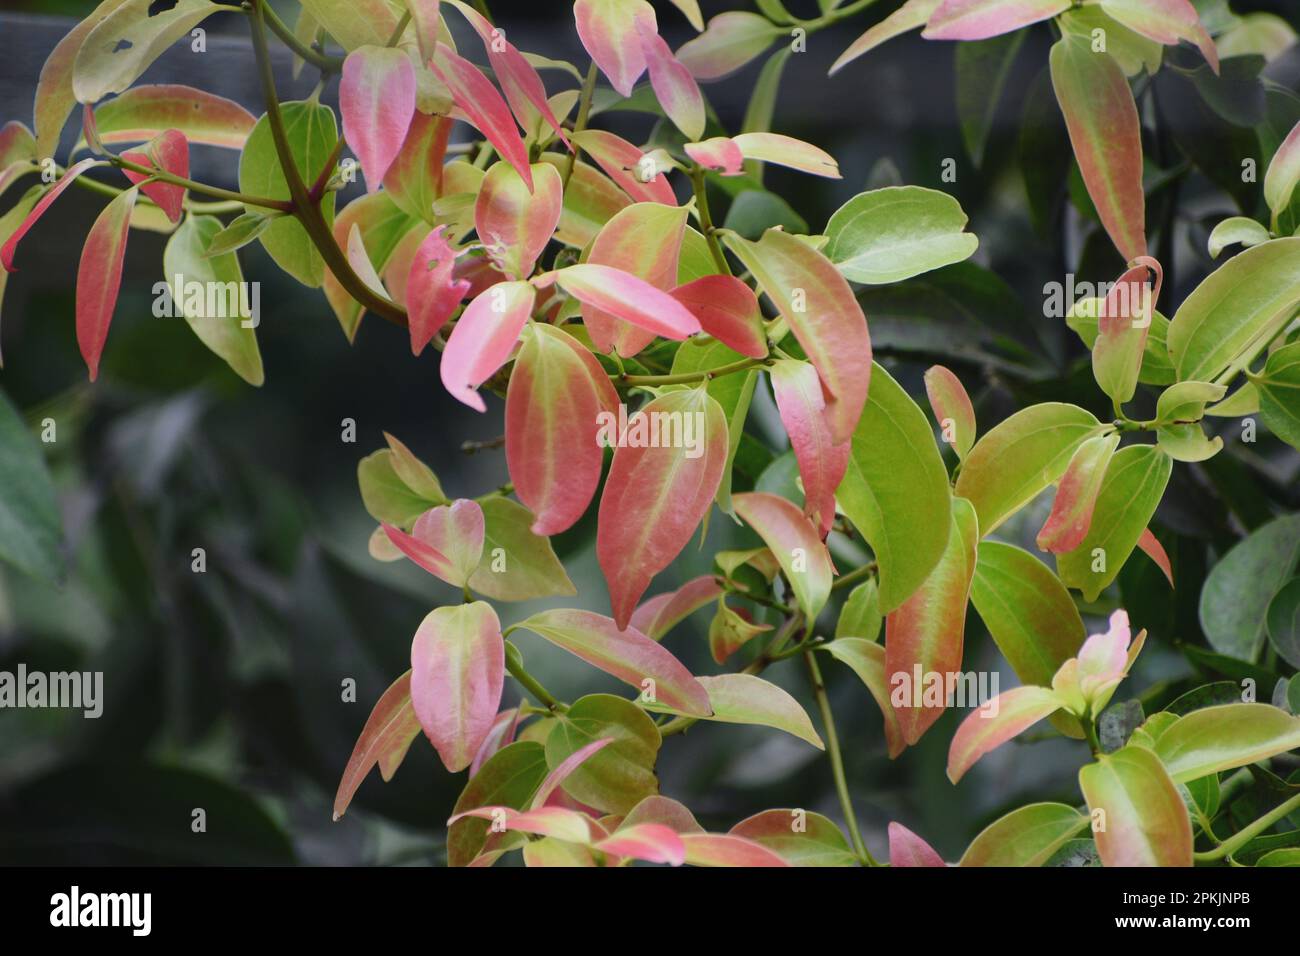 Cinnamon tree with colorful leaves Stock Photo